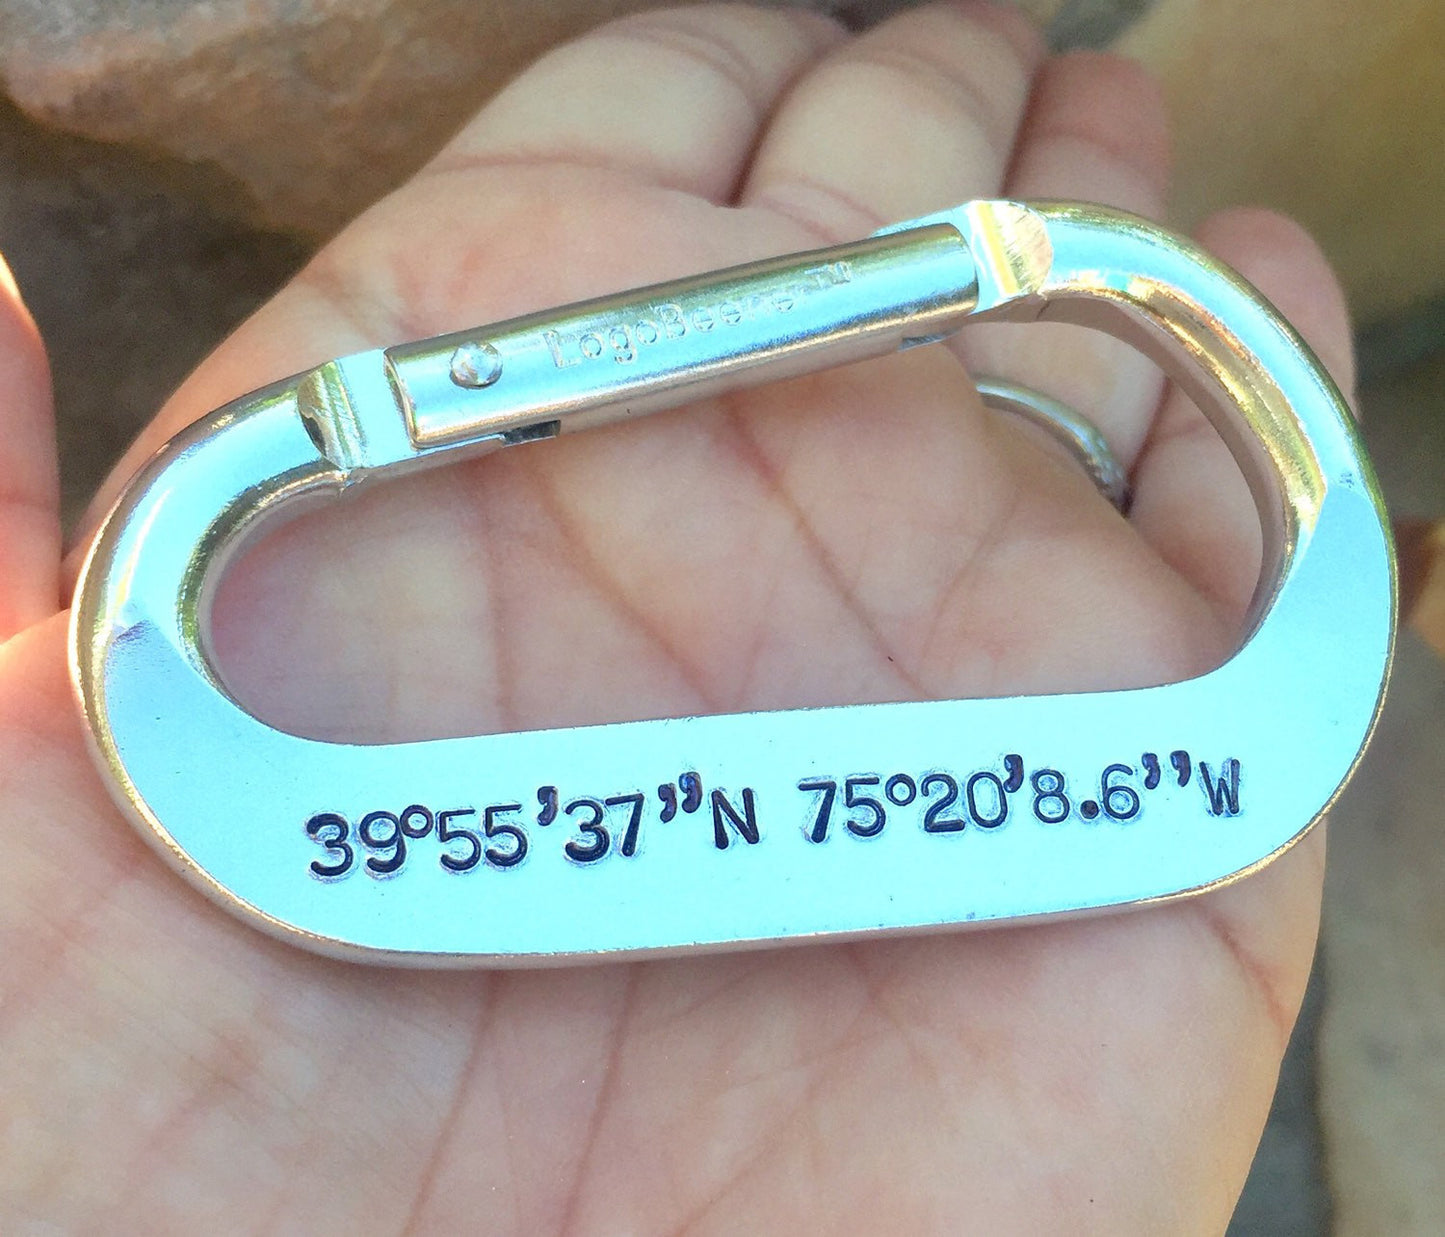 Personalized Carabiner - Natashaaloha, jewelry, bracelets, necklace, keychains, fishing lures, gifts for men, charms, personalized, 